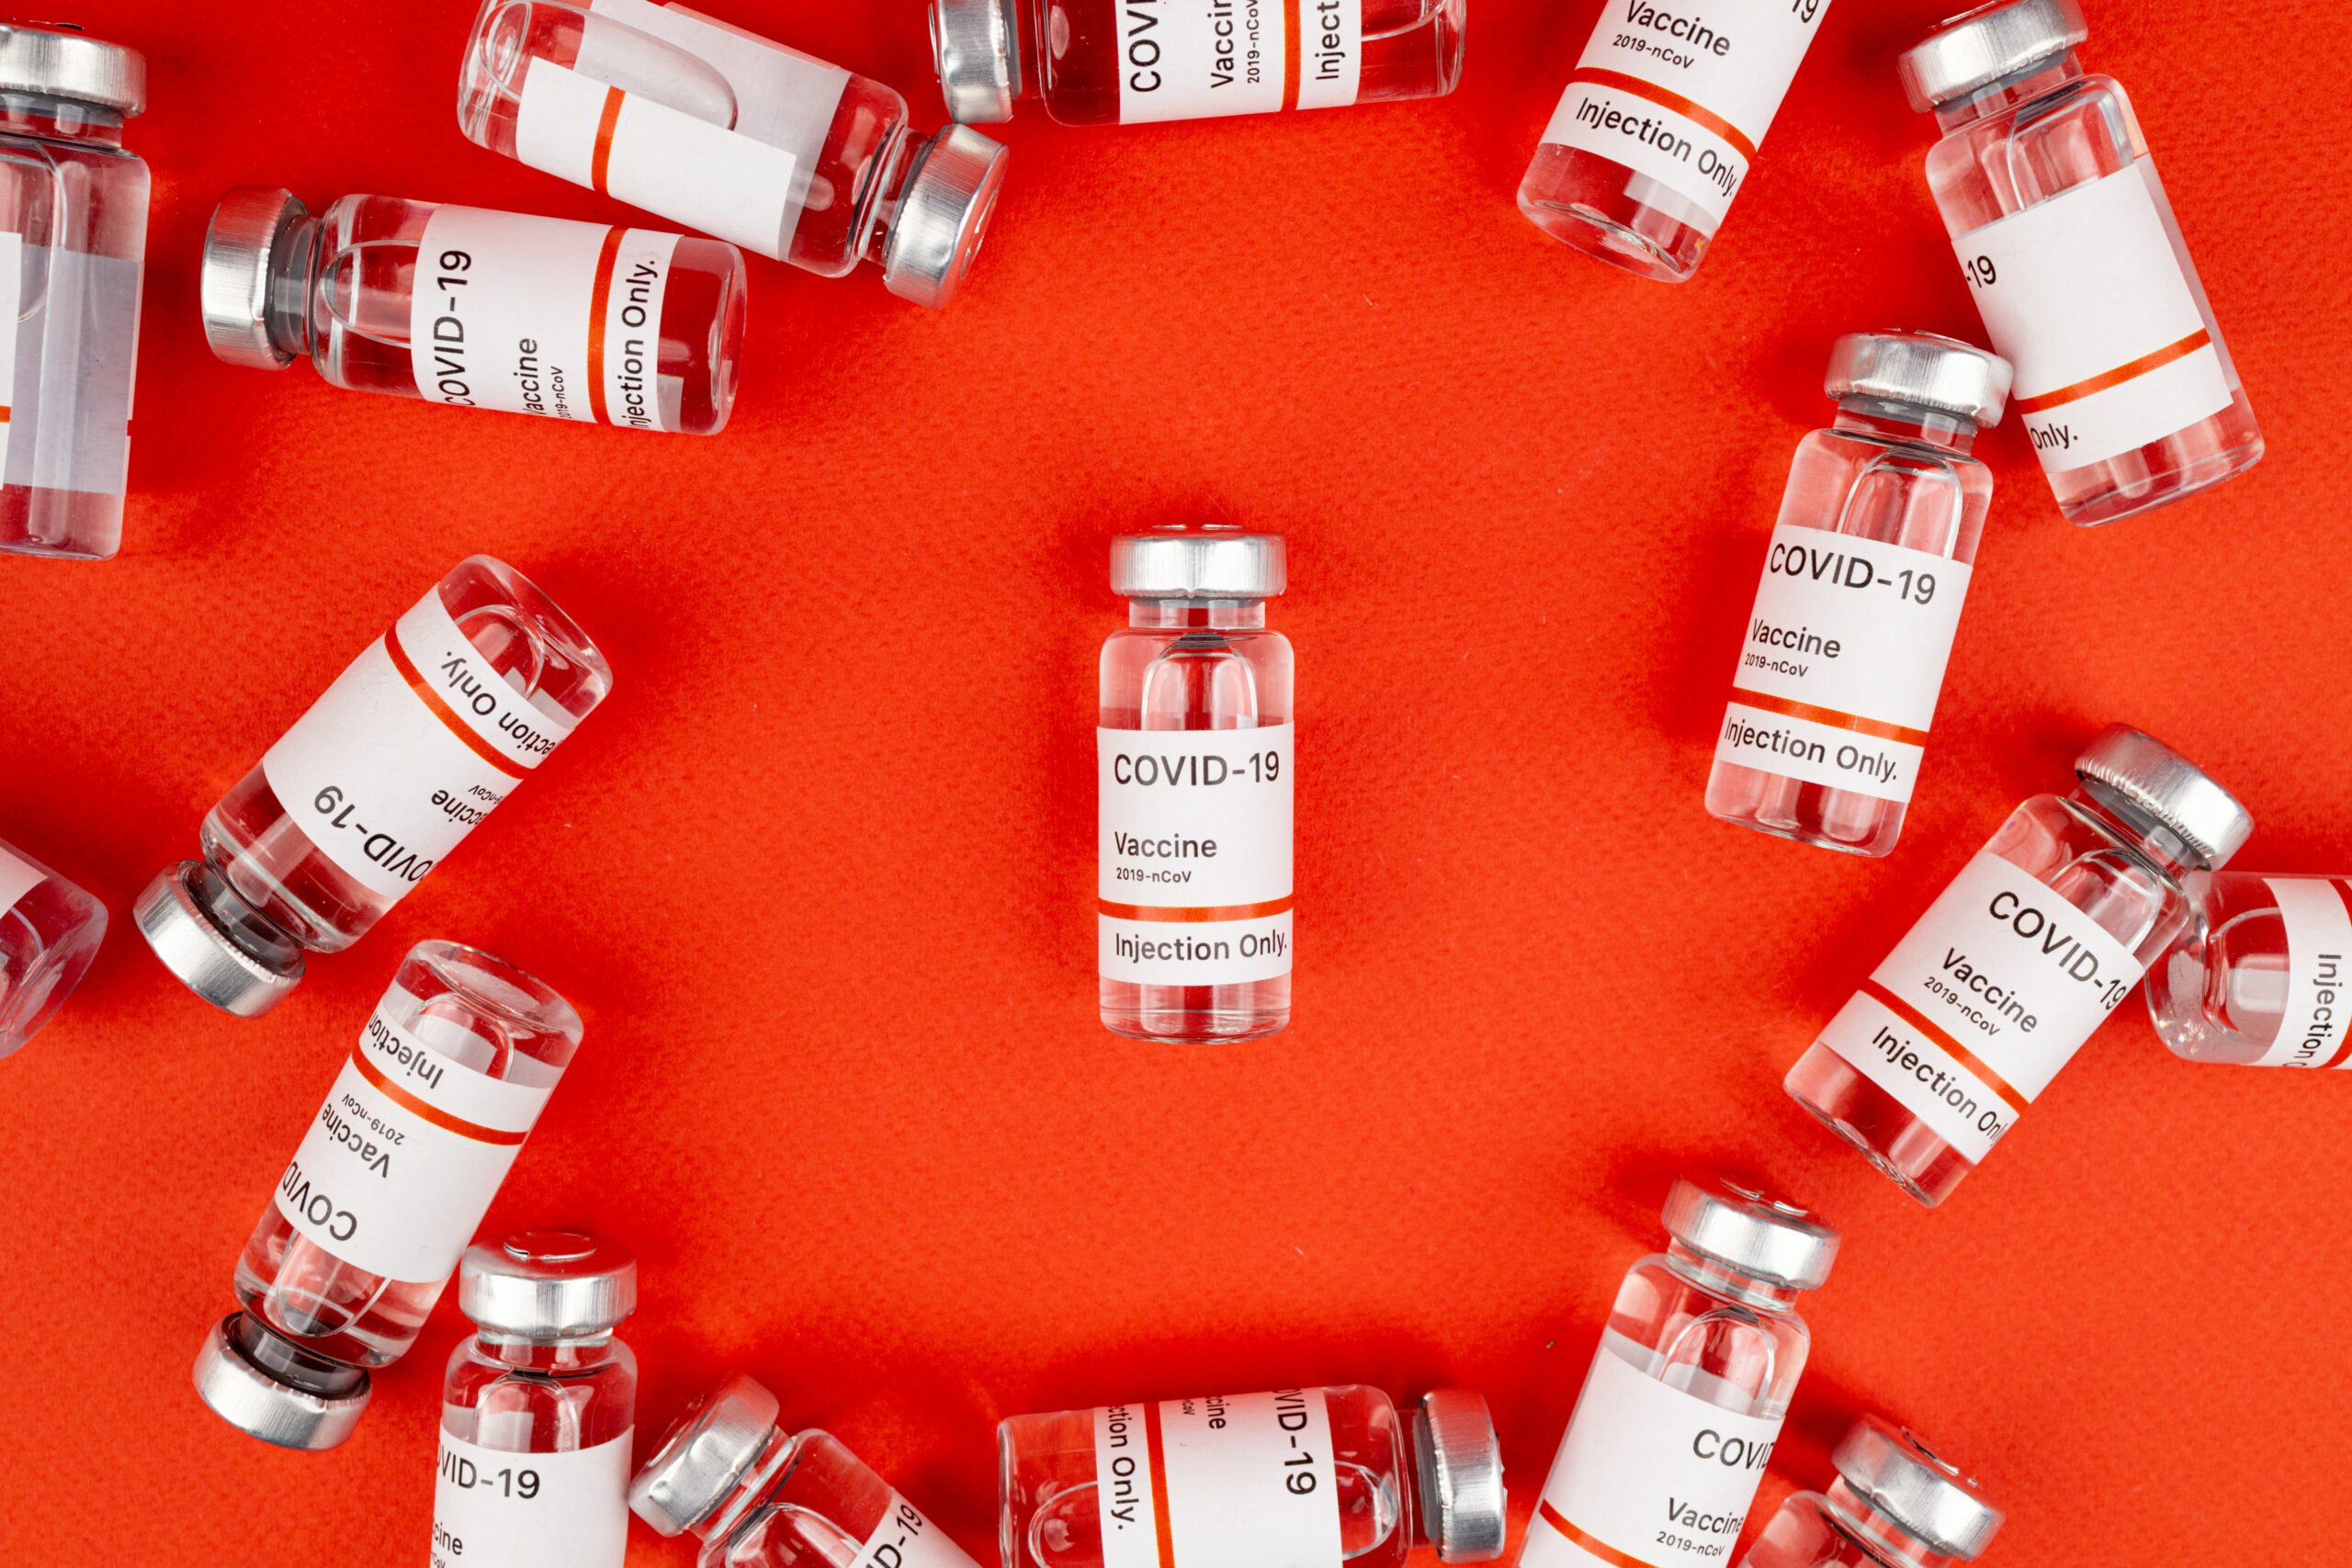 Vials of Covid vaccine scattered across a red background. Photo courtesy Maksim Goncharenok.